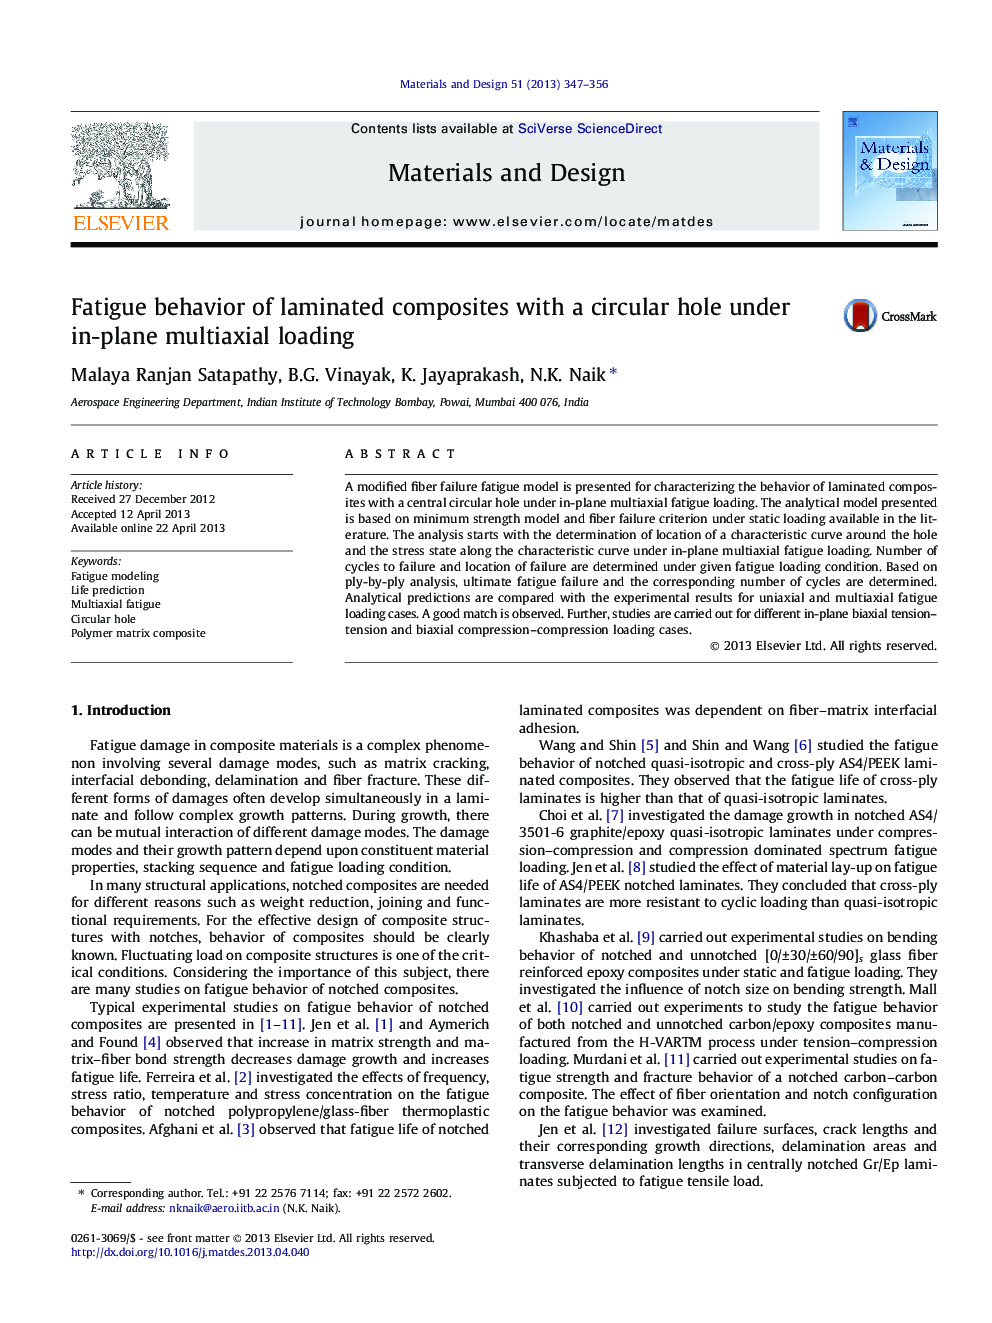 Fatigue behavior of laminated composites with a circular hole under in-plane multiaxial loading